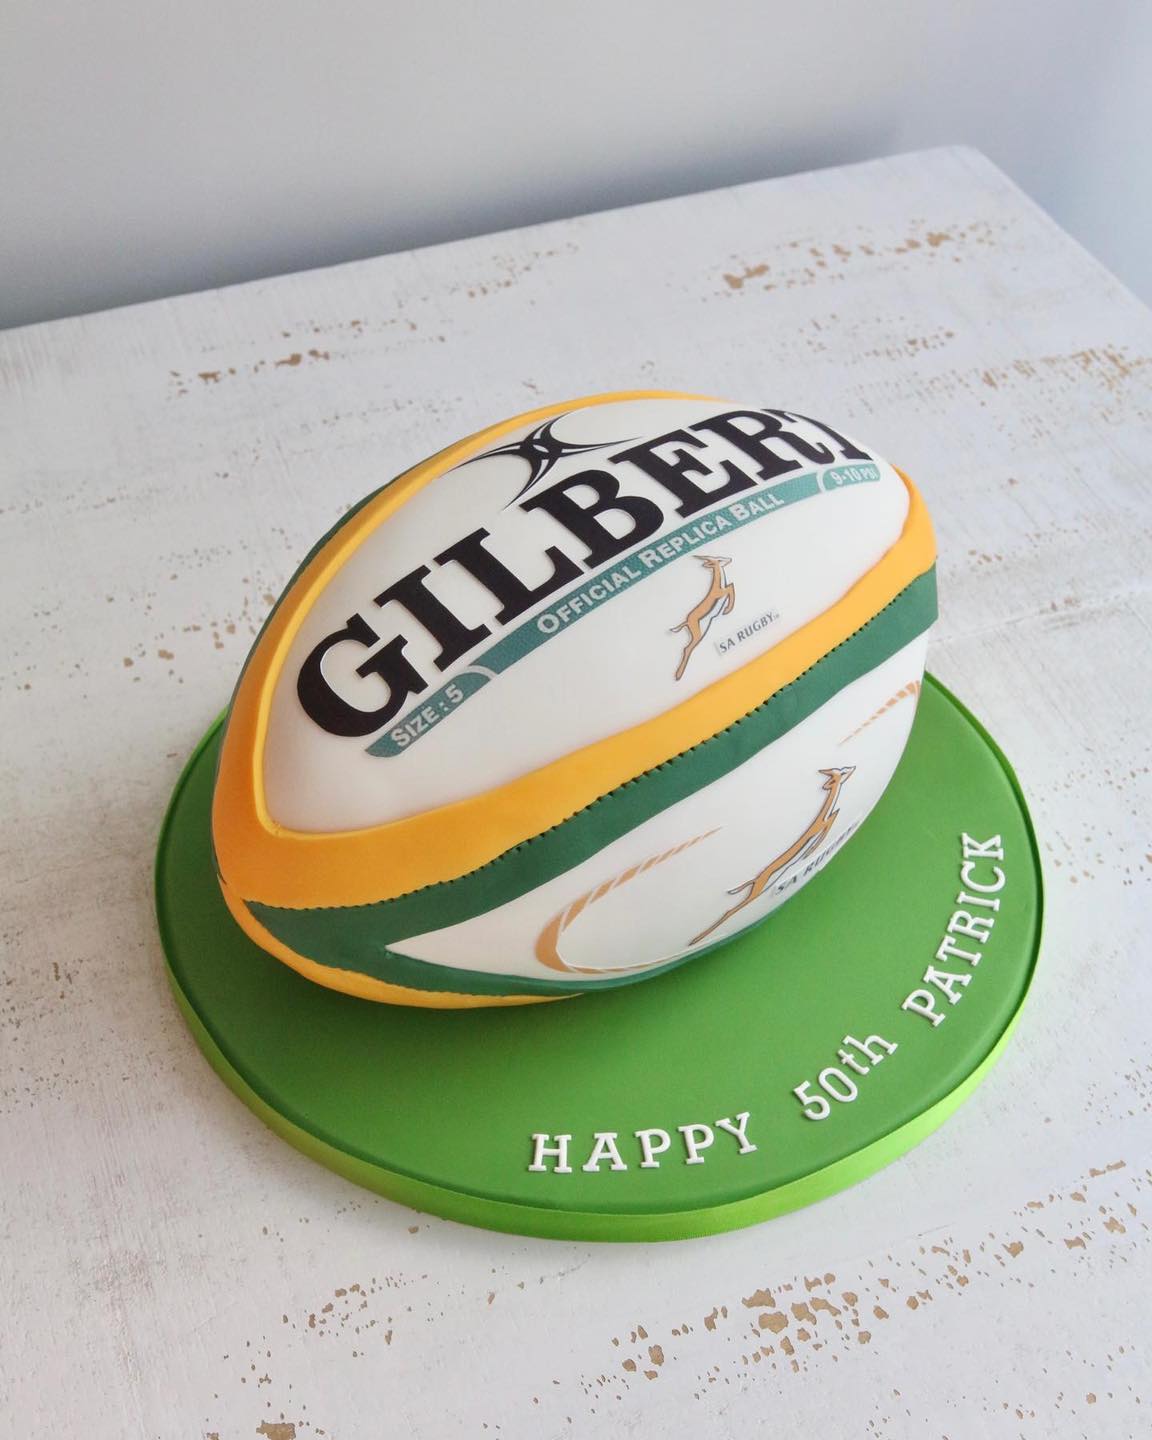 South Africa Springboks Rugby Ball Cake